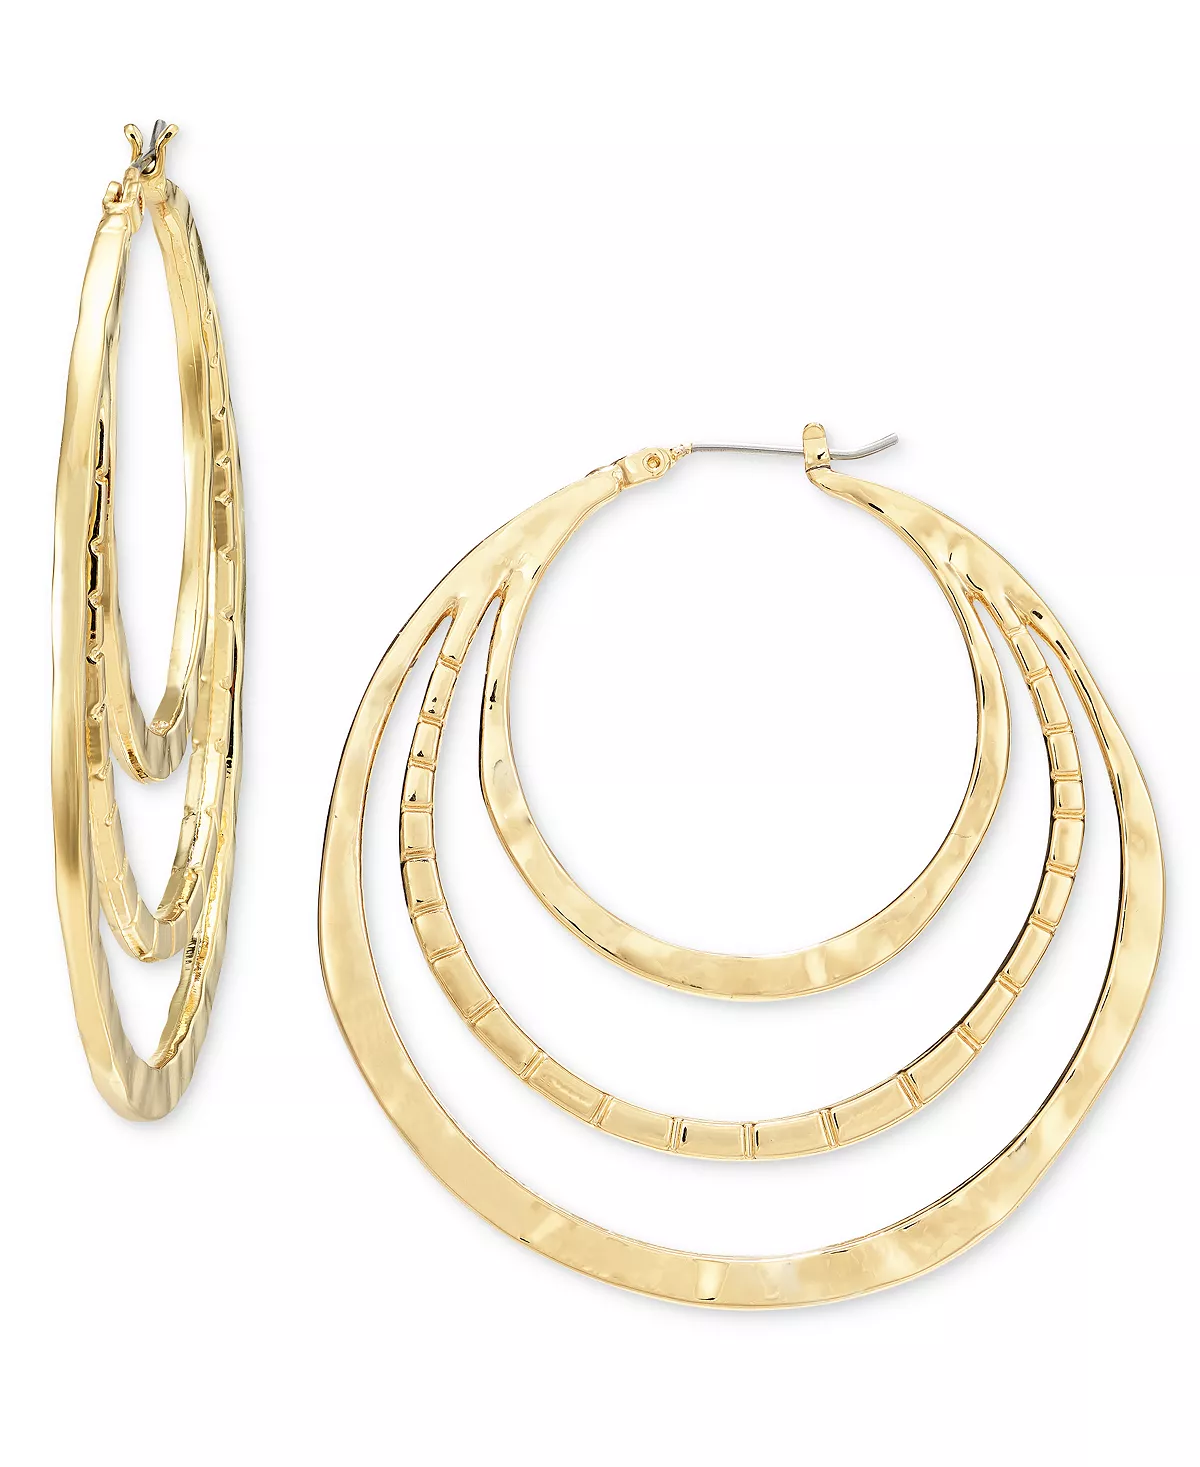 Style & Co Gold-Tone Multi-Row Hoop Earrings, 2", Created for Macy's Discounts and Cashback